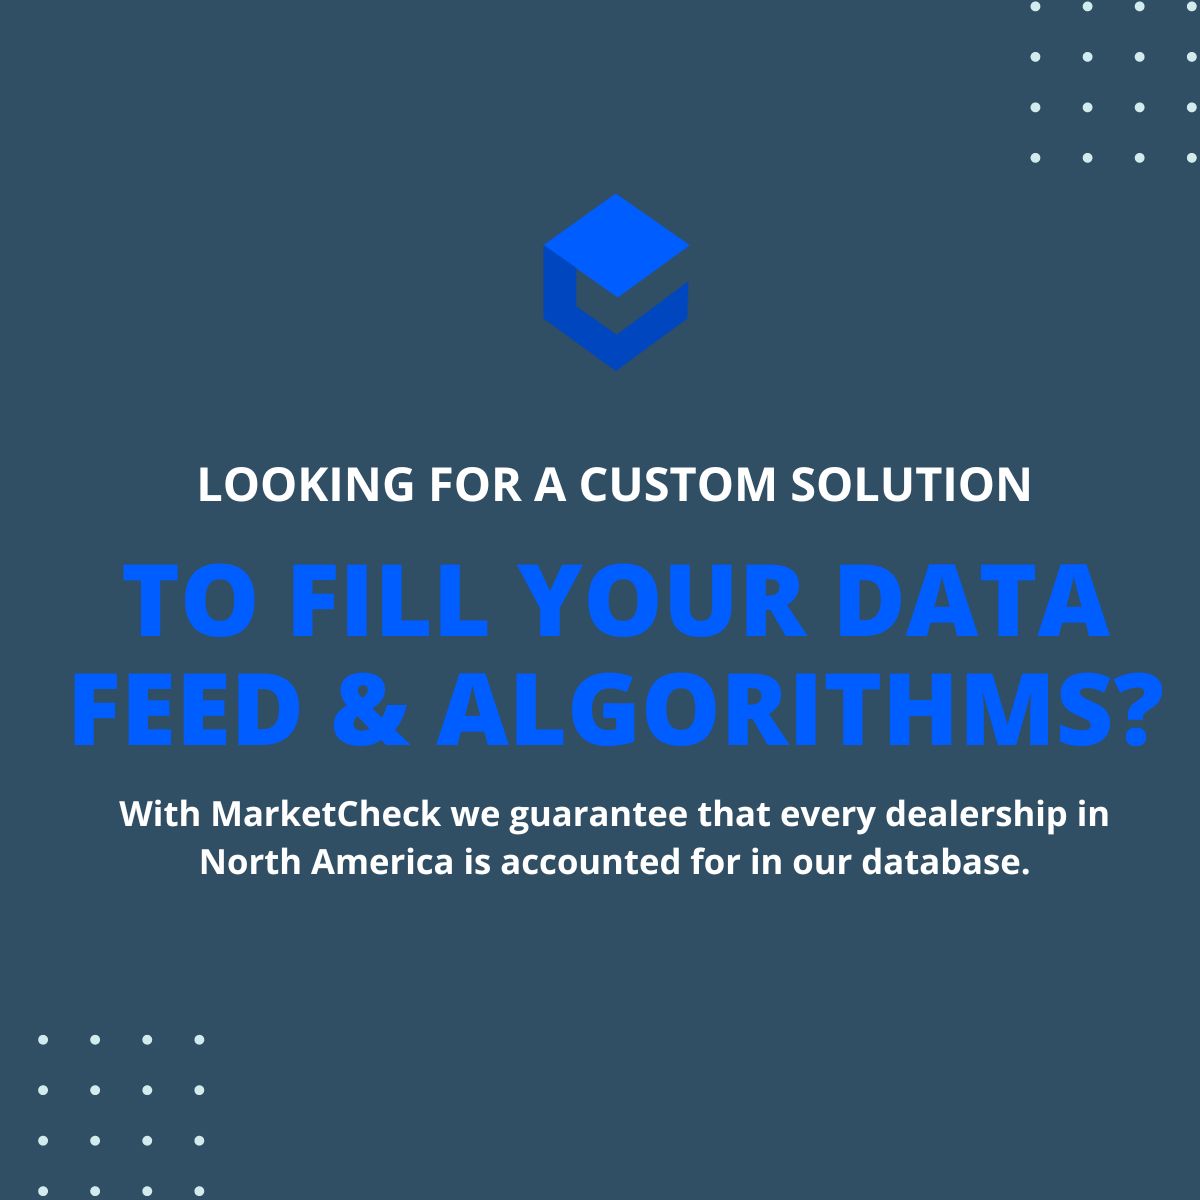 With MarketCheck we guarantee that every dealership in North America is accounted for in our database.